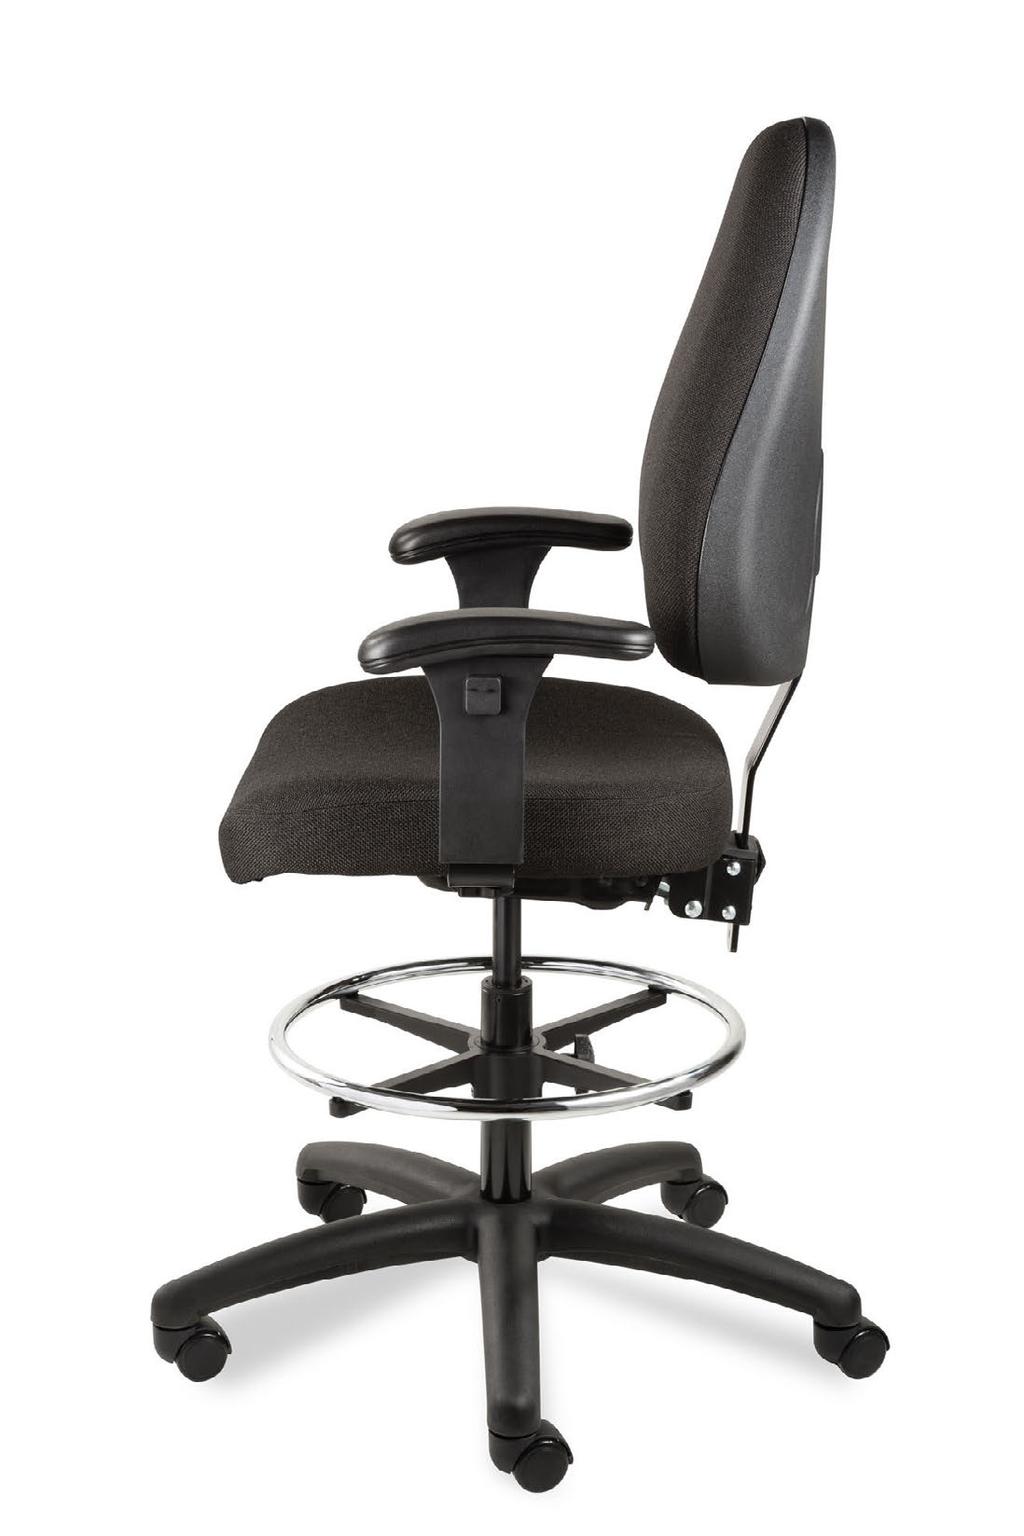 A Well-Adjusted Workplace The risk of musculoskeletal disorders can be significantly reduced by ensuring that your chair is properly adjusted to conform to the body and the environment it is being